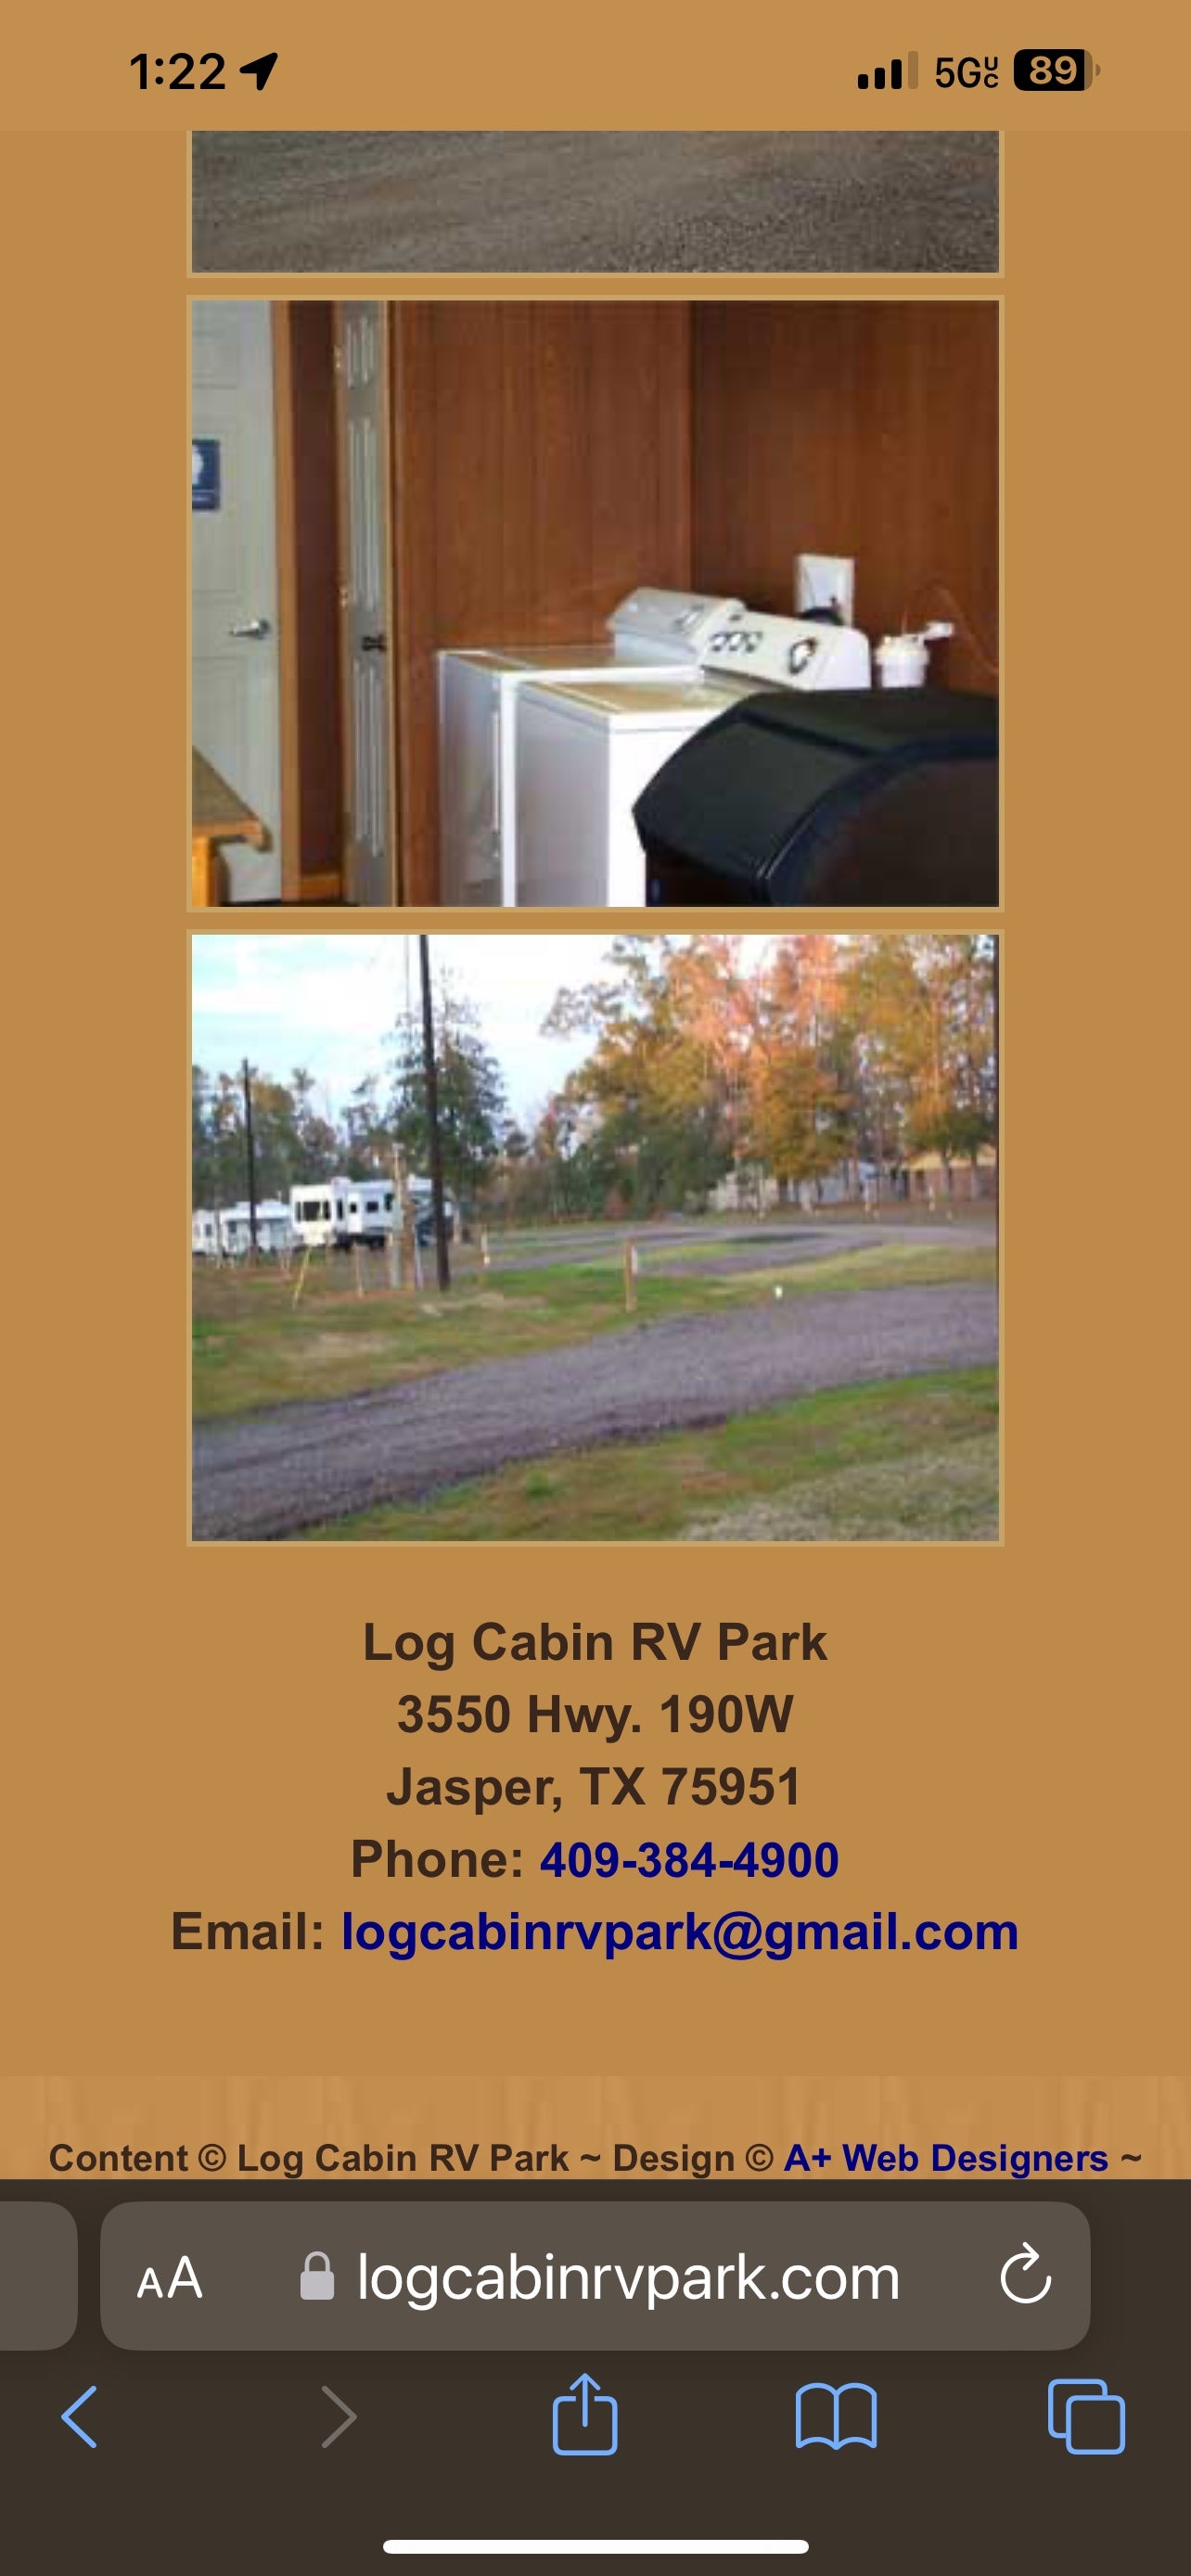 Camper submitted image from Log Cabin RV Park - 1